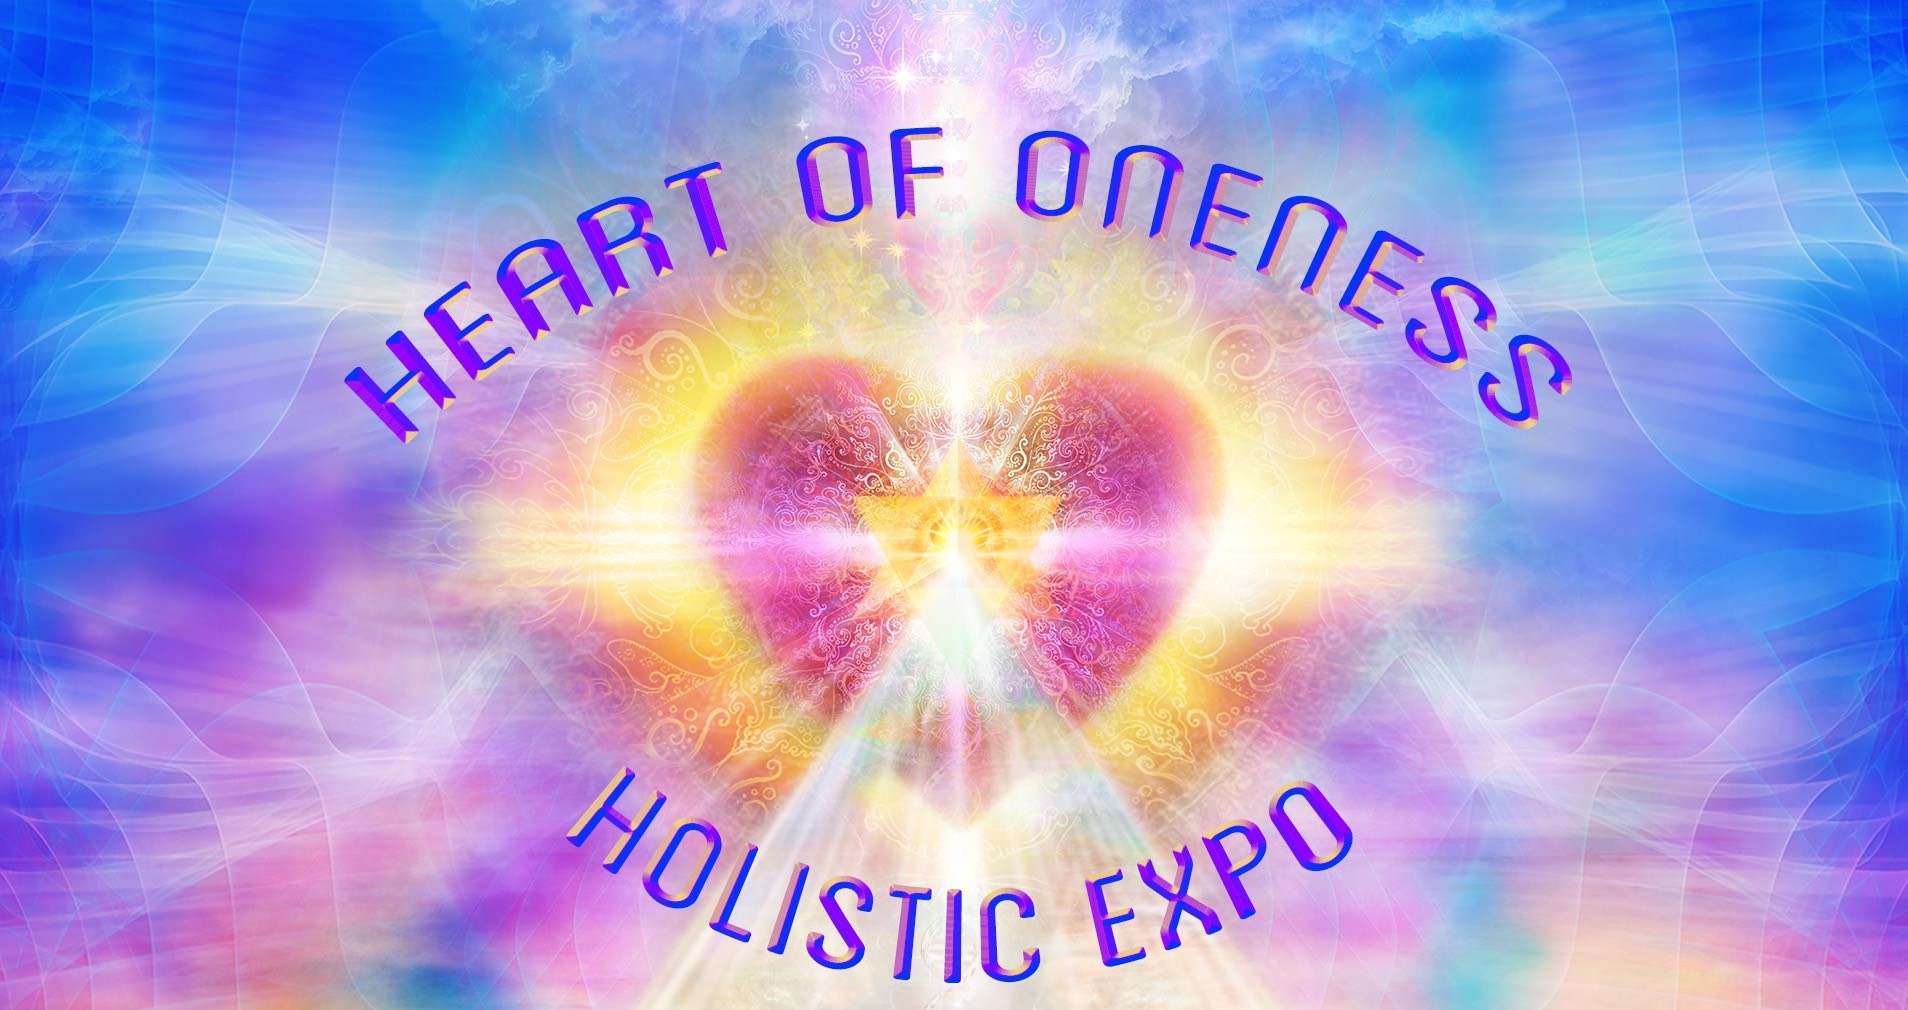 Heart Of Oneness Holistic Expo